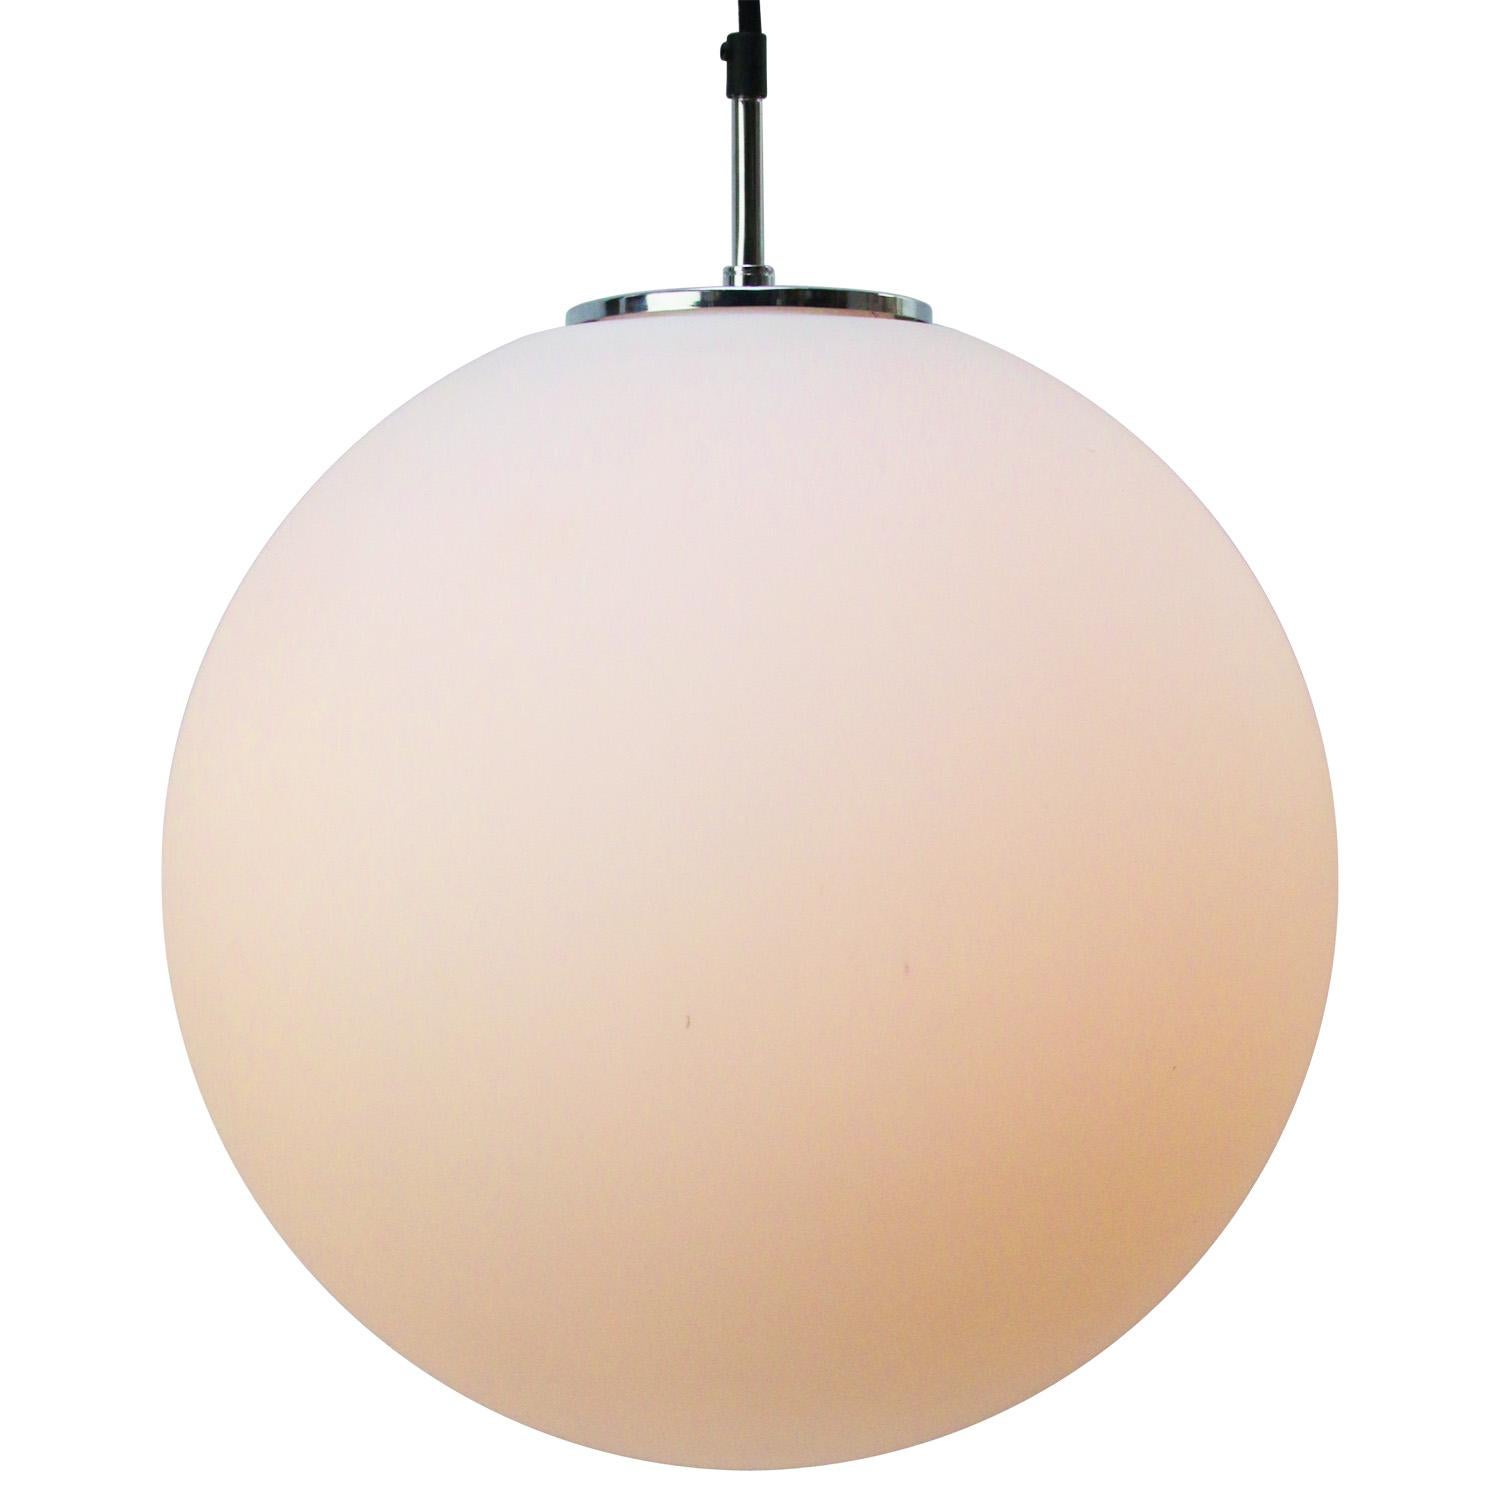 Large round mat opaline glass pendant by Glashütte Limburg Duitsland
2 meter black cotton wire
Chrome top

Weight: 2.50 kg / 5.5 lb

Priced per individual item. All lamps have been made suitable by international standards for incandescent light